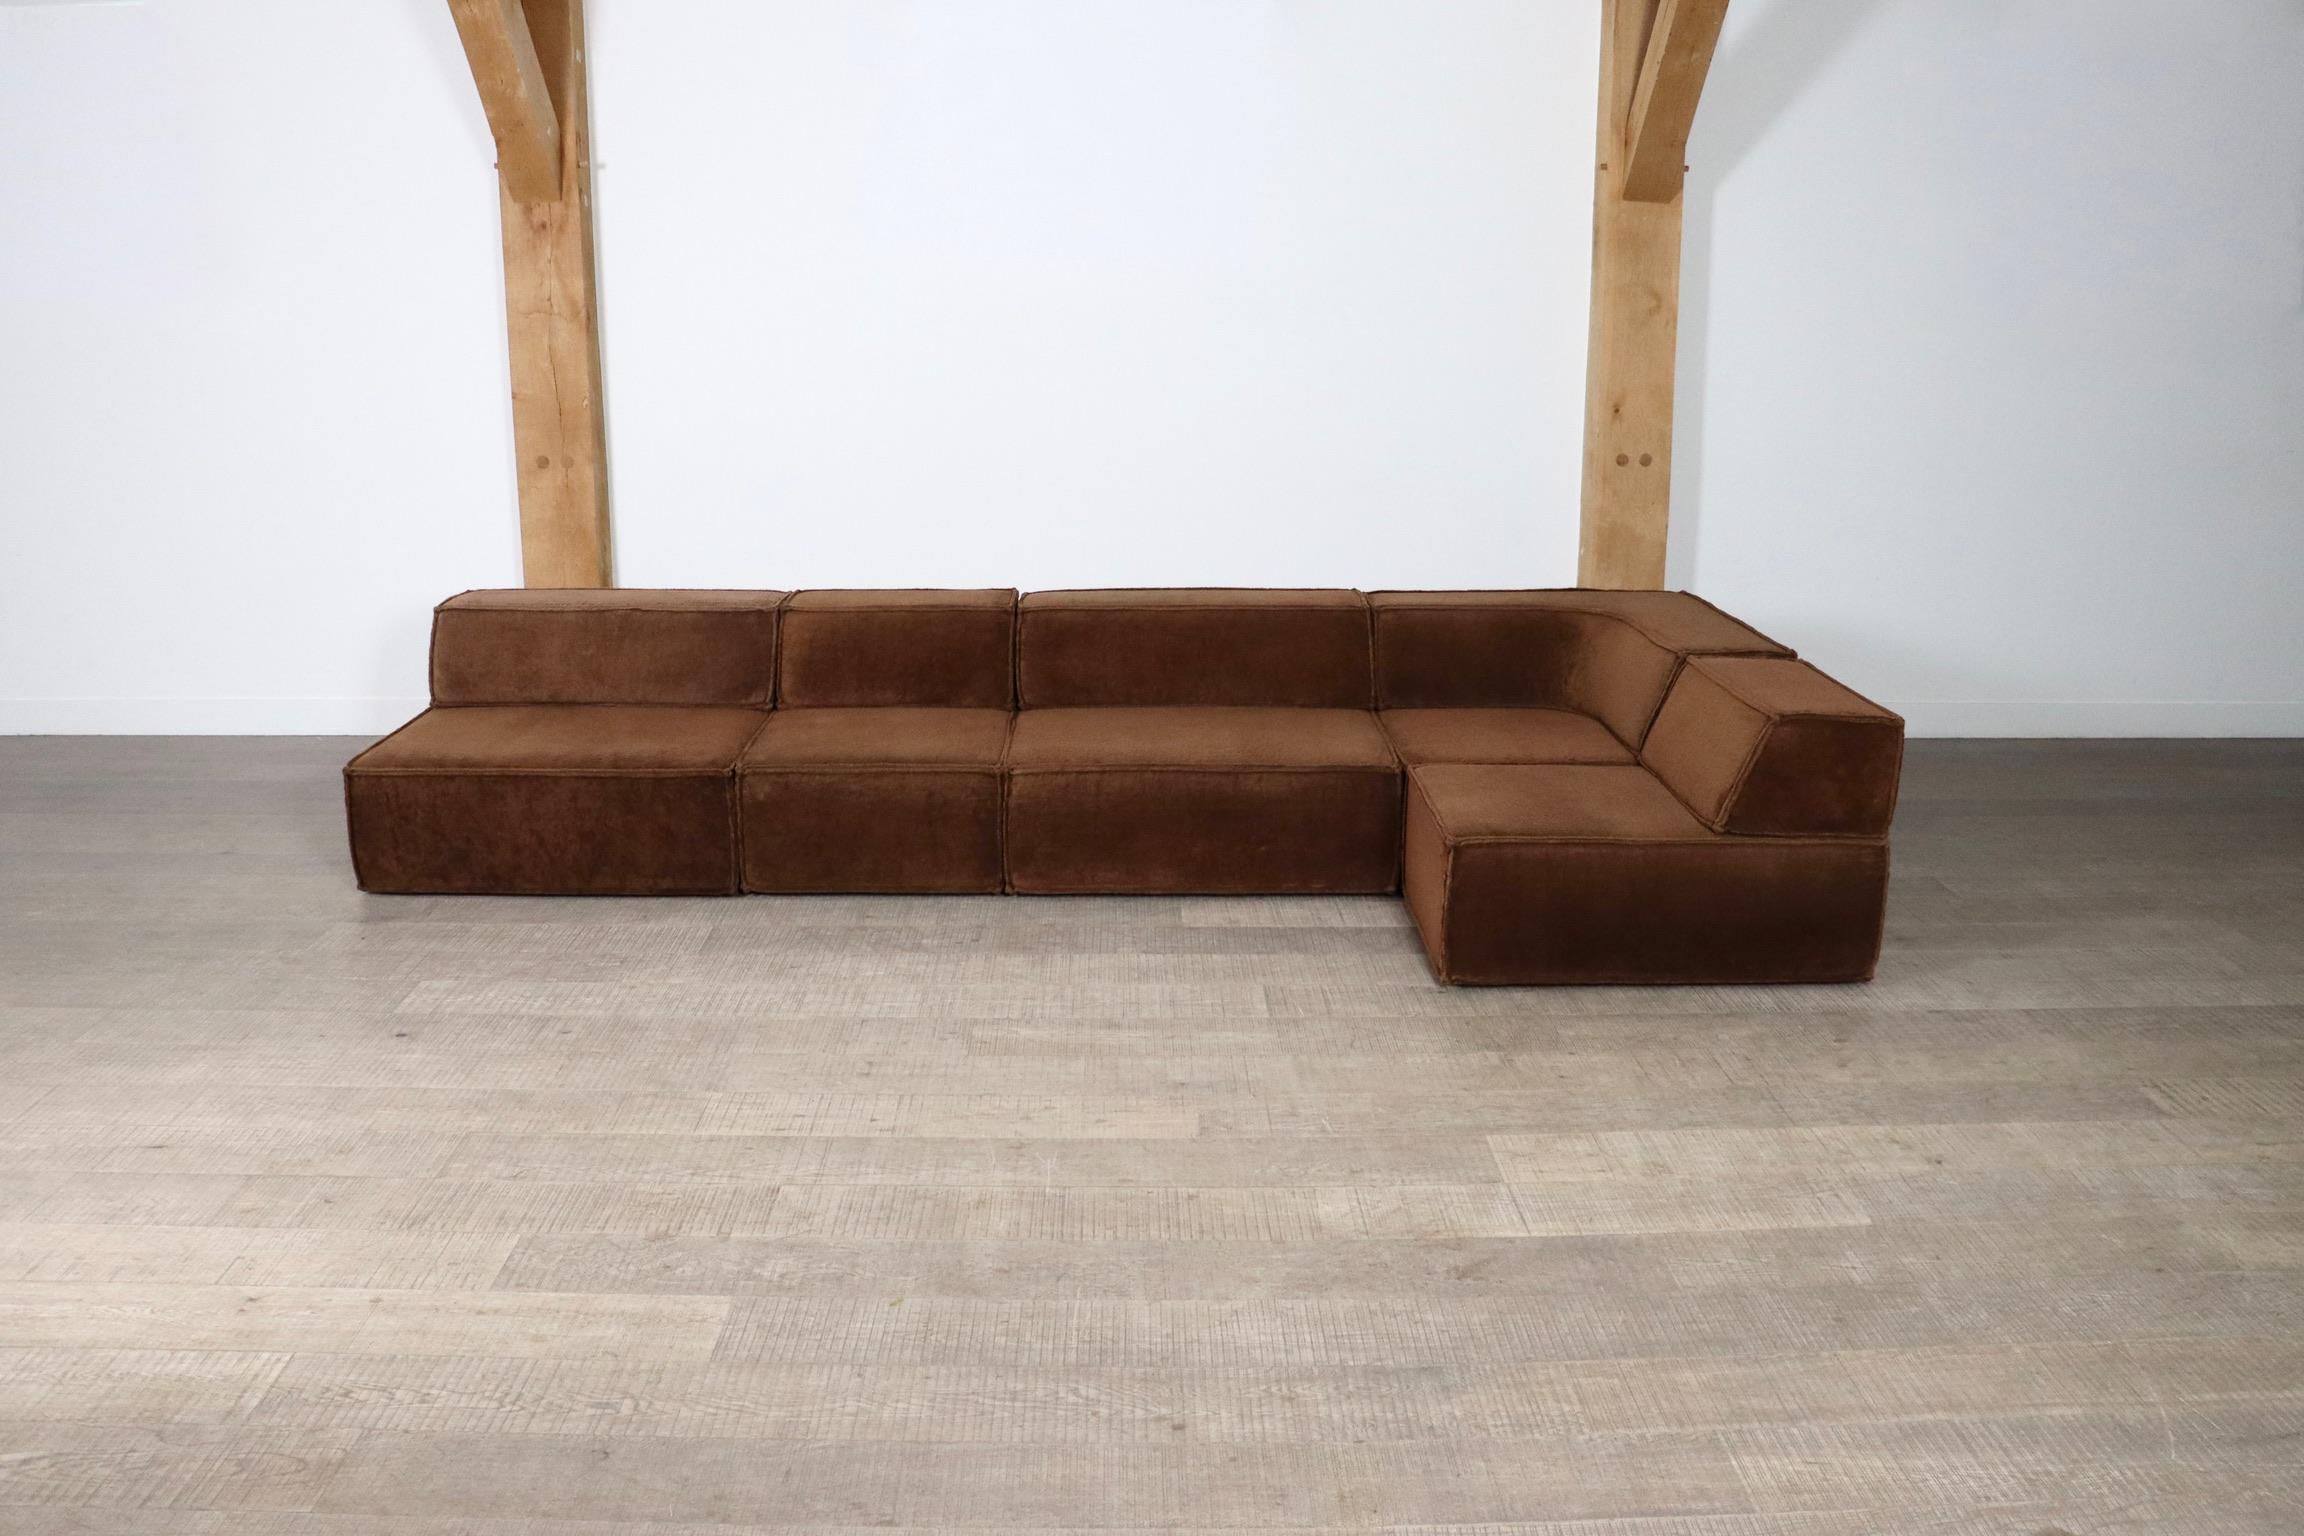 The iconic modular sofa COR trio, executed in the original brown teddy fabric. The Cor Trio design was created in 1972 by Team Form AG in Switzerland for COR, and is still popular today due to its timeless design and high comfort.

This sofa